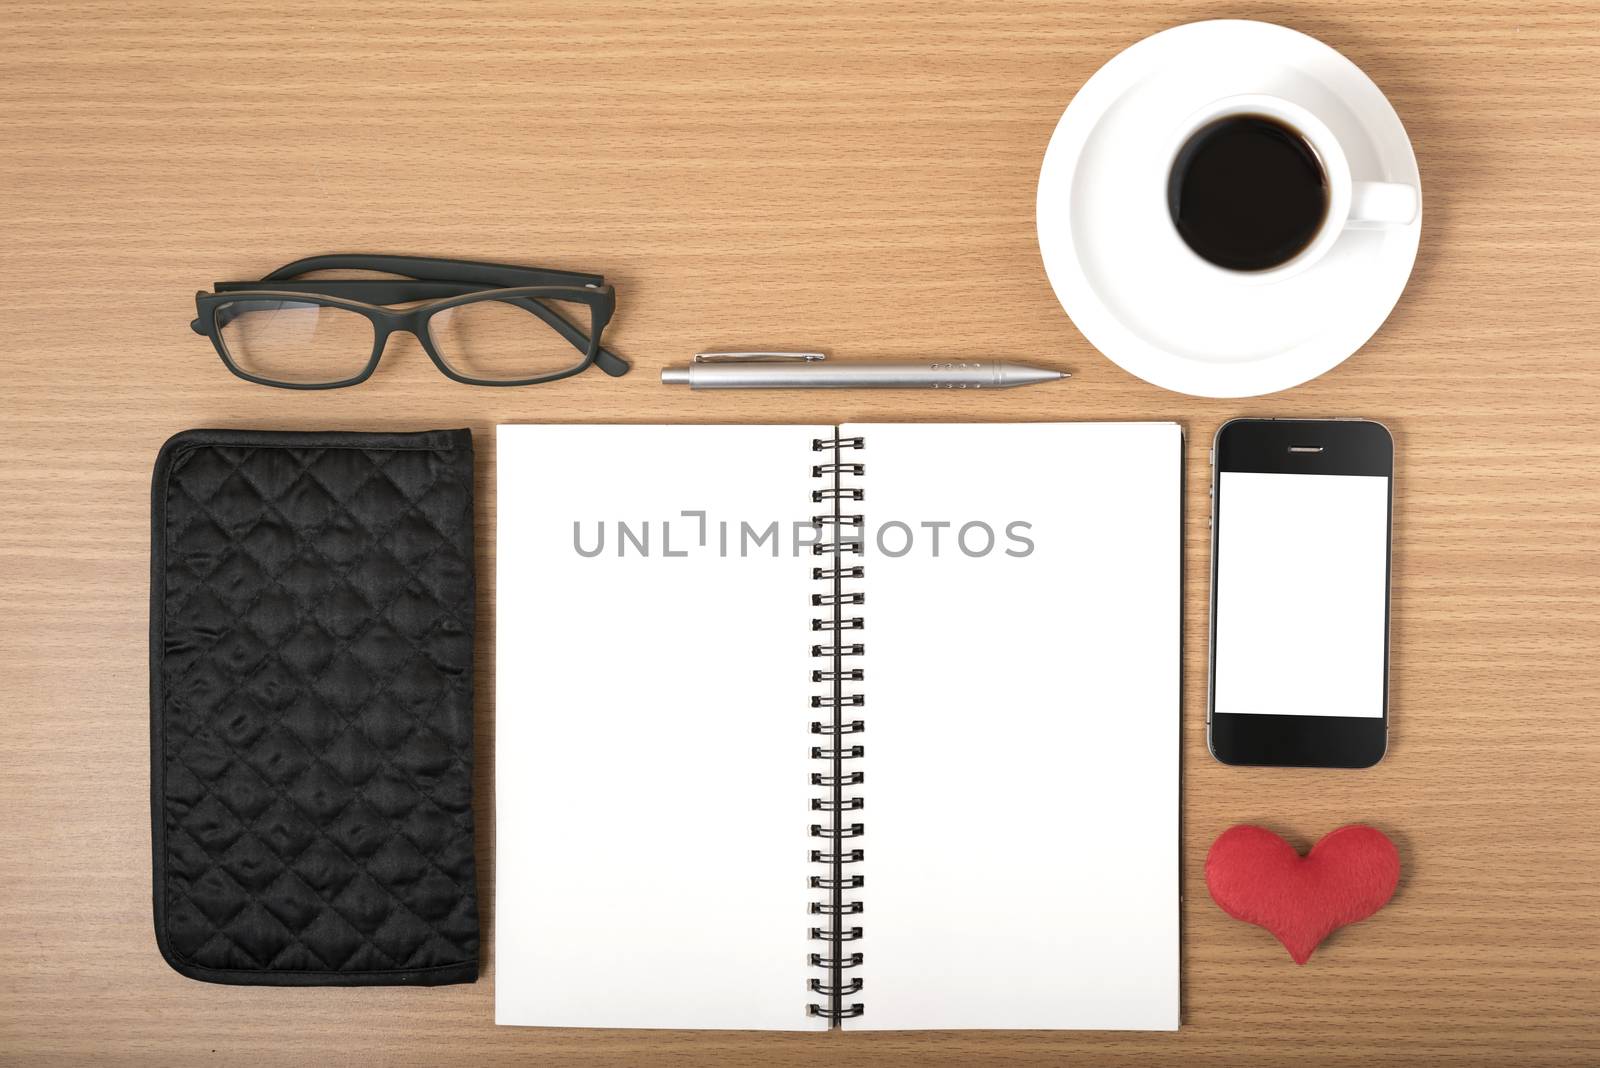 office desk : coffee with phone,notepad,eyeglasses,wallet,heart on wood background